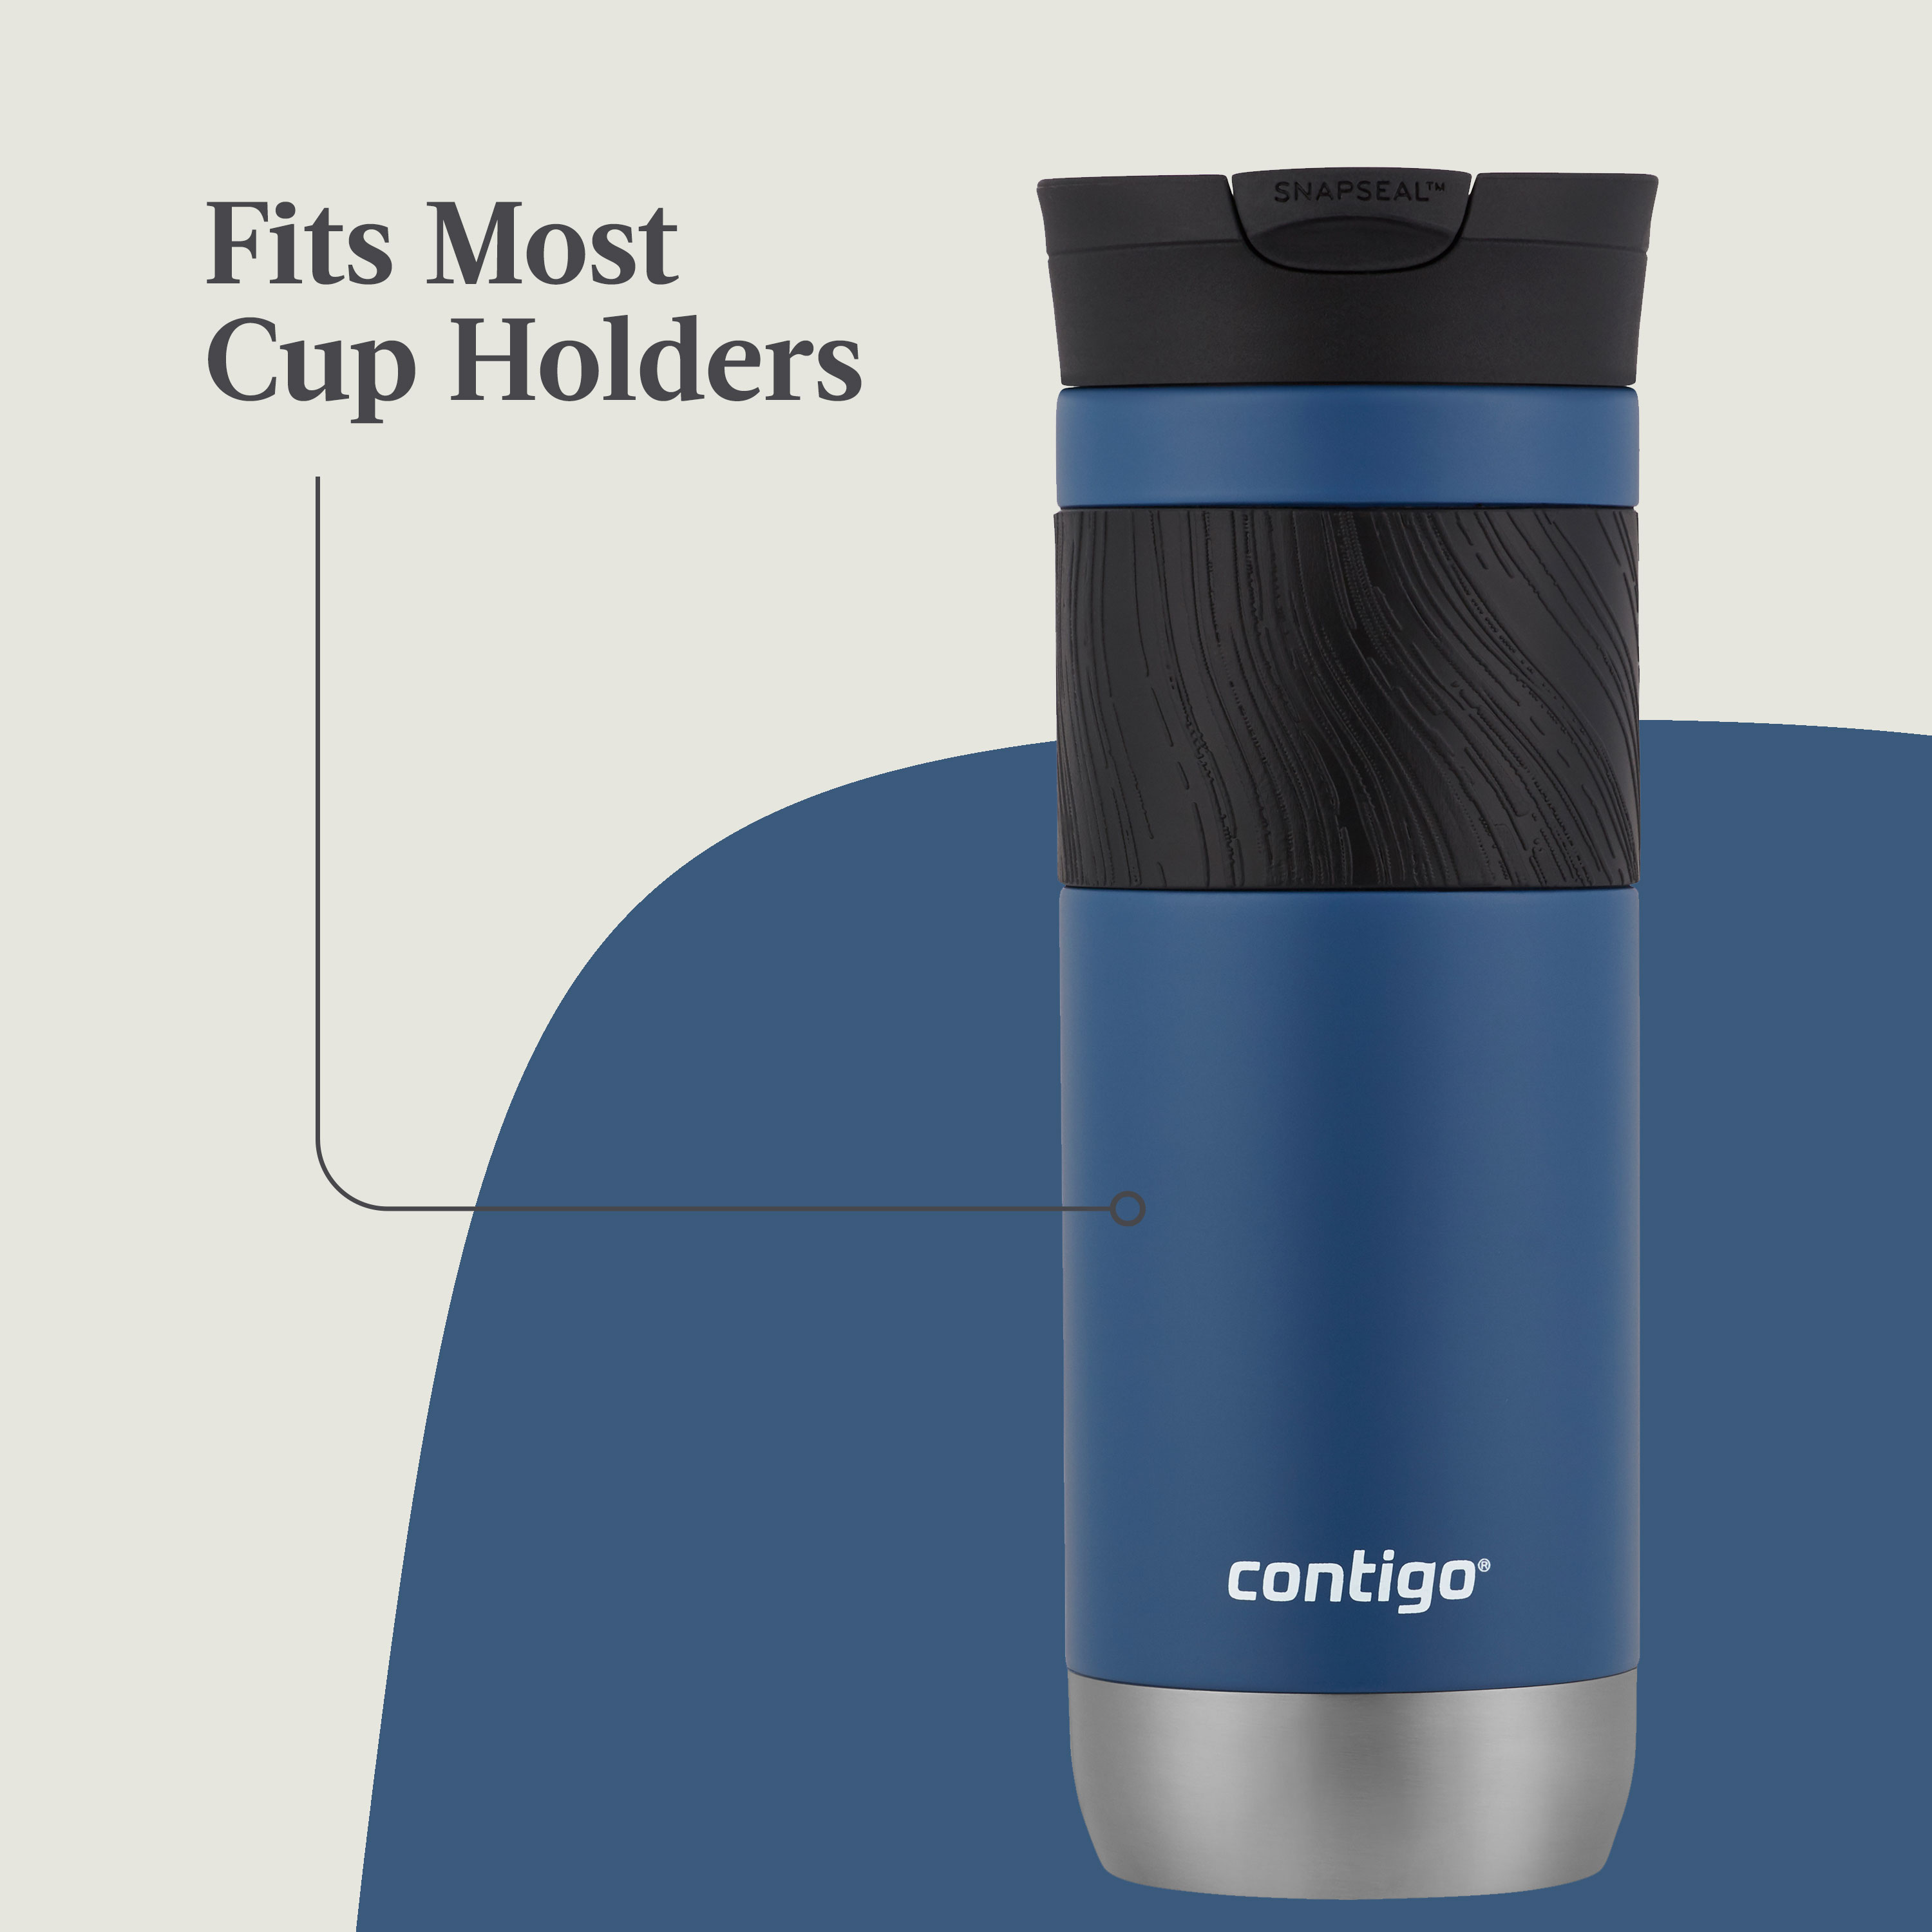 Contigo Byron 2.0 Stainless Steel Travel Mug with SNAPSEAL Lid and Grip Blue Corn, 20 fl oz. - image 4 of 6